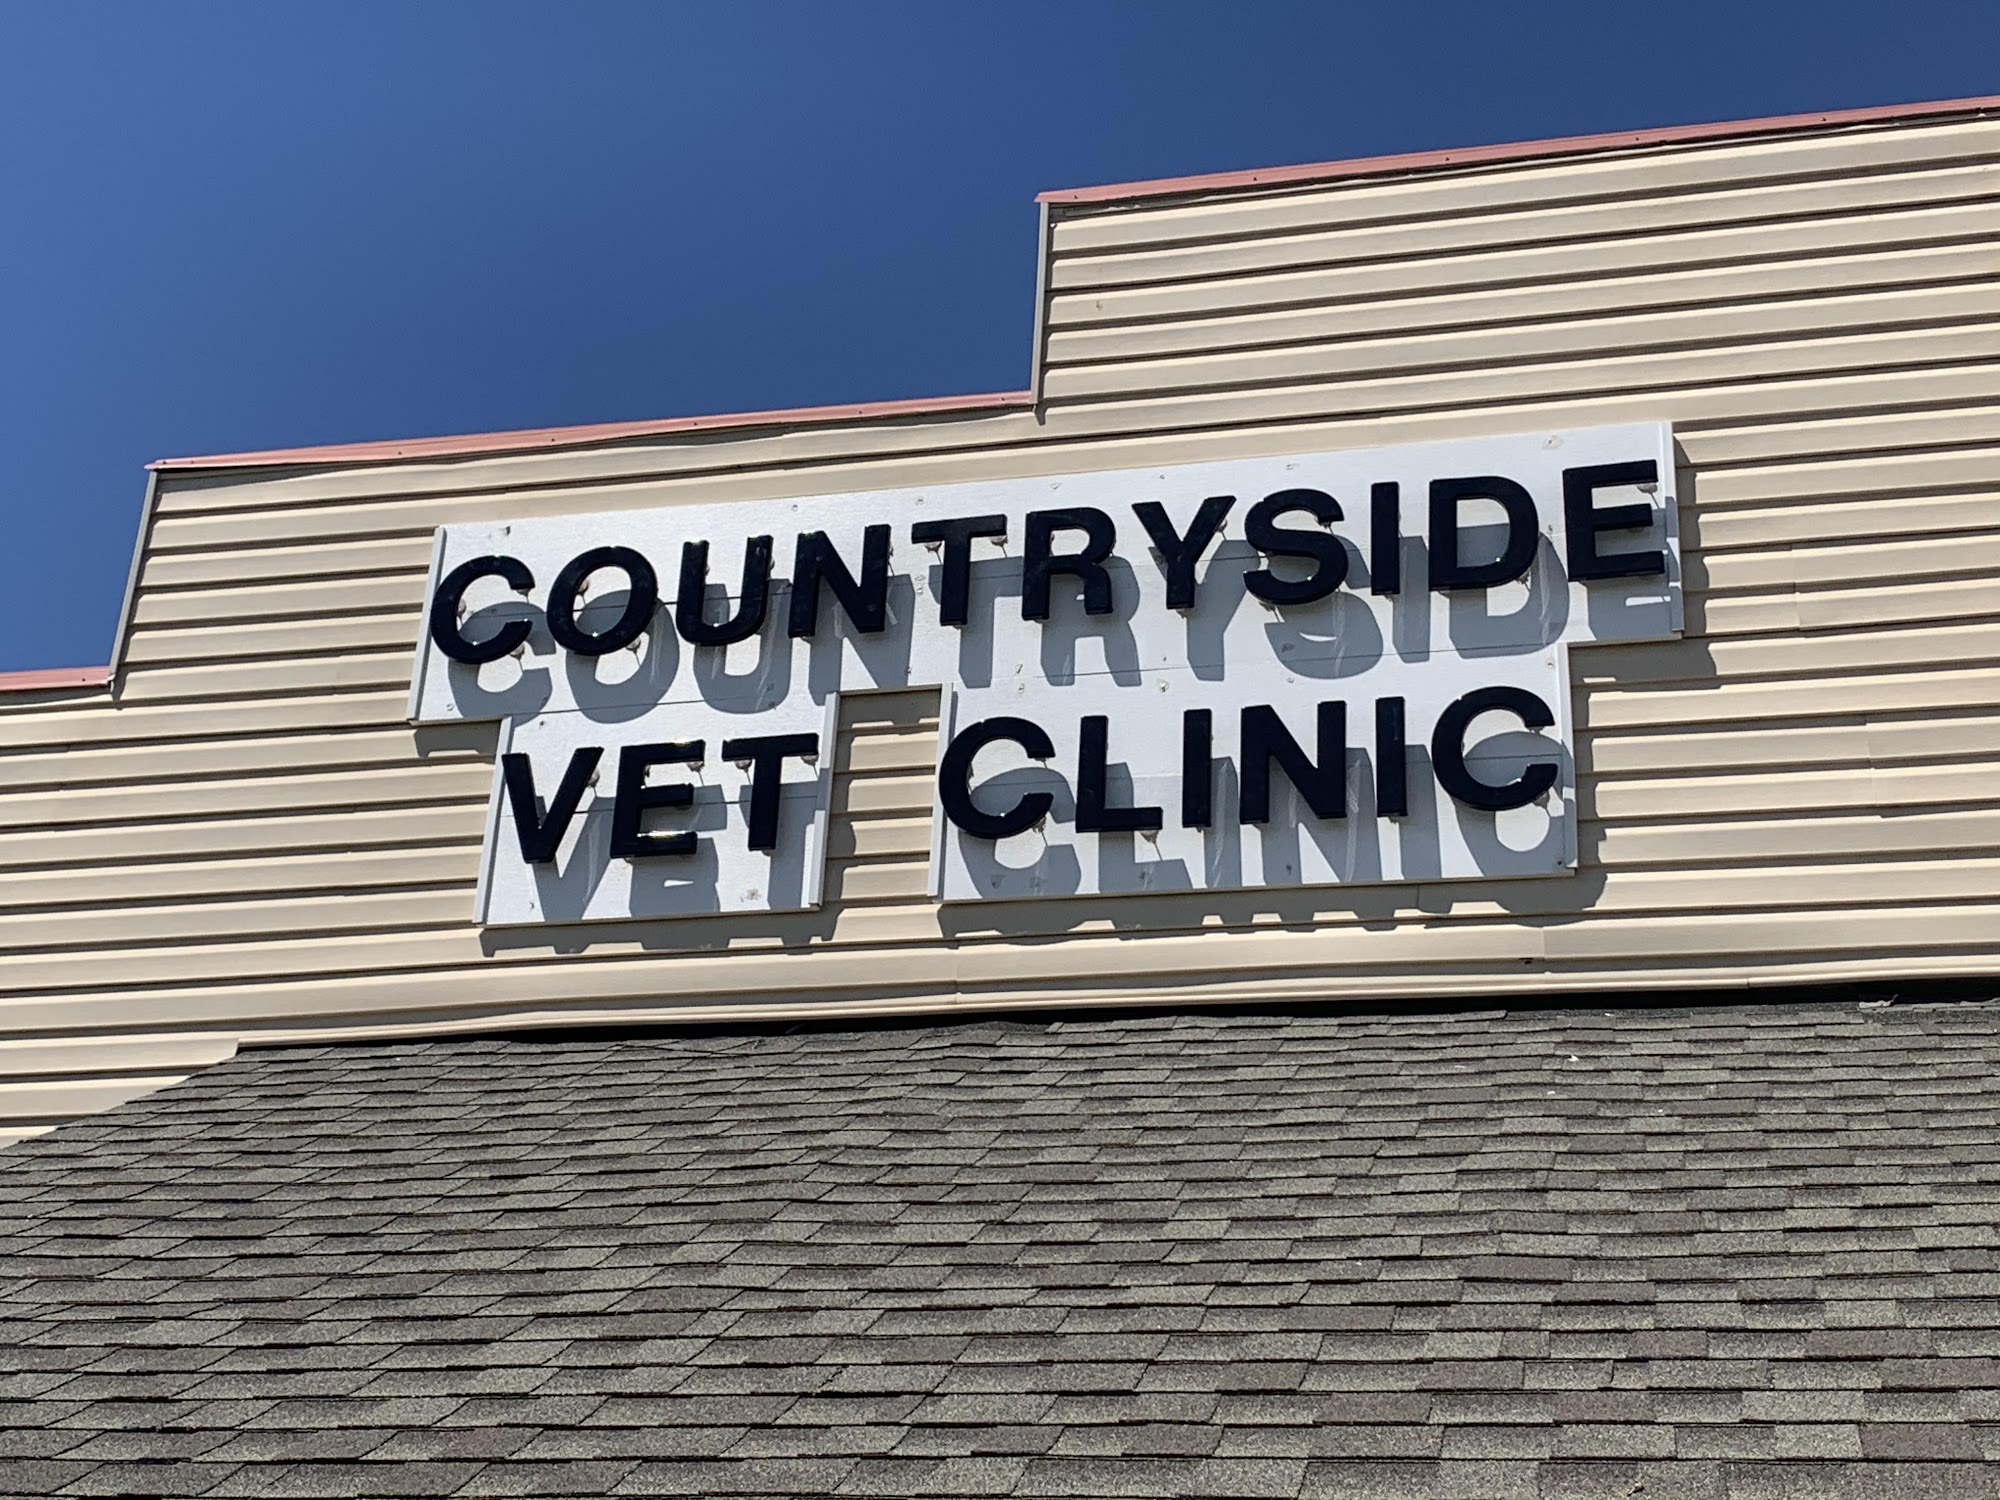 Countryside (Moville) Veterinary Clinic 741 E Frontage Rd, Moville Iowa 51039